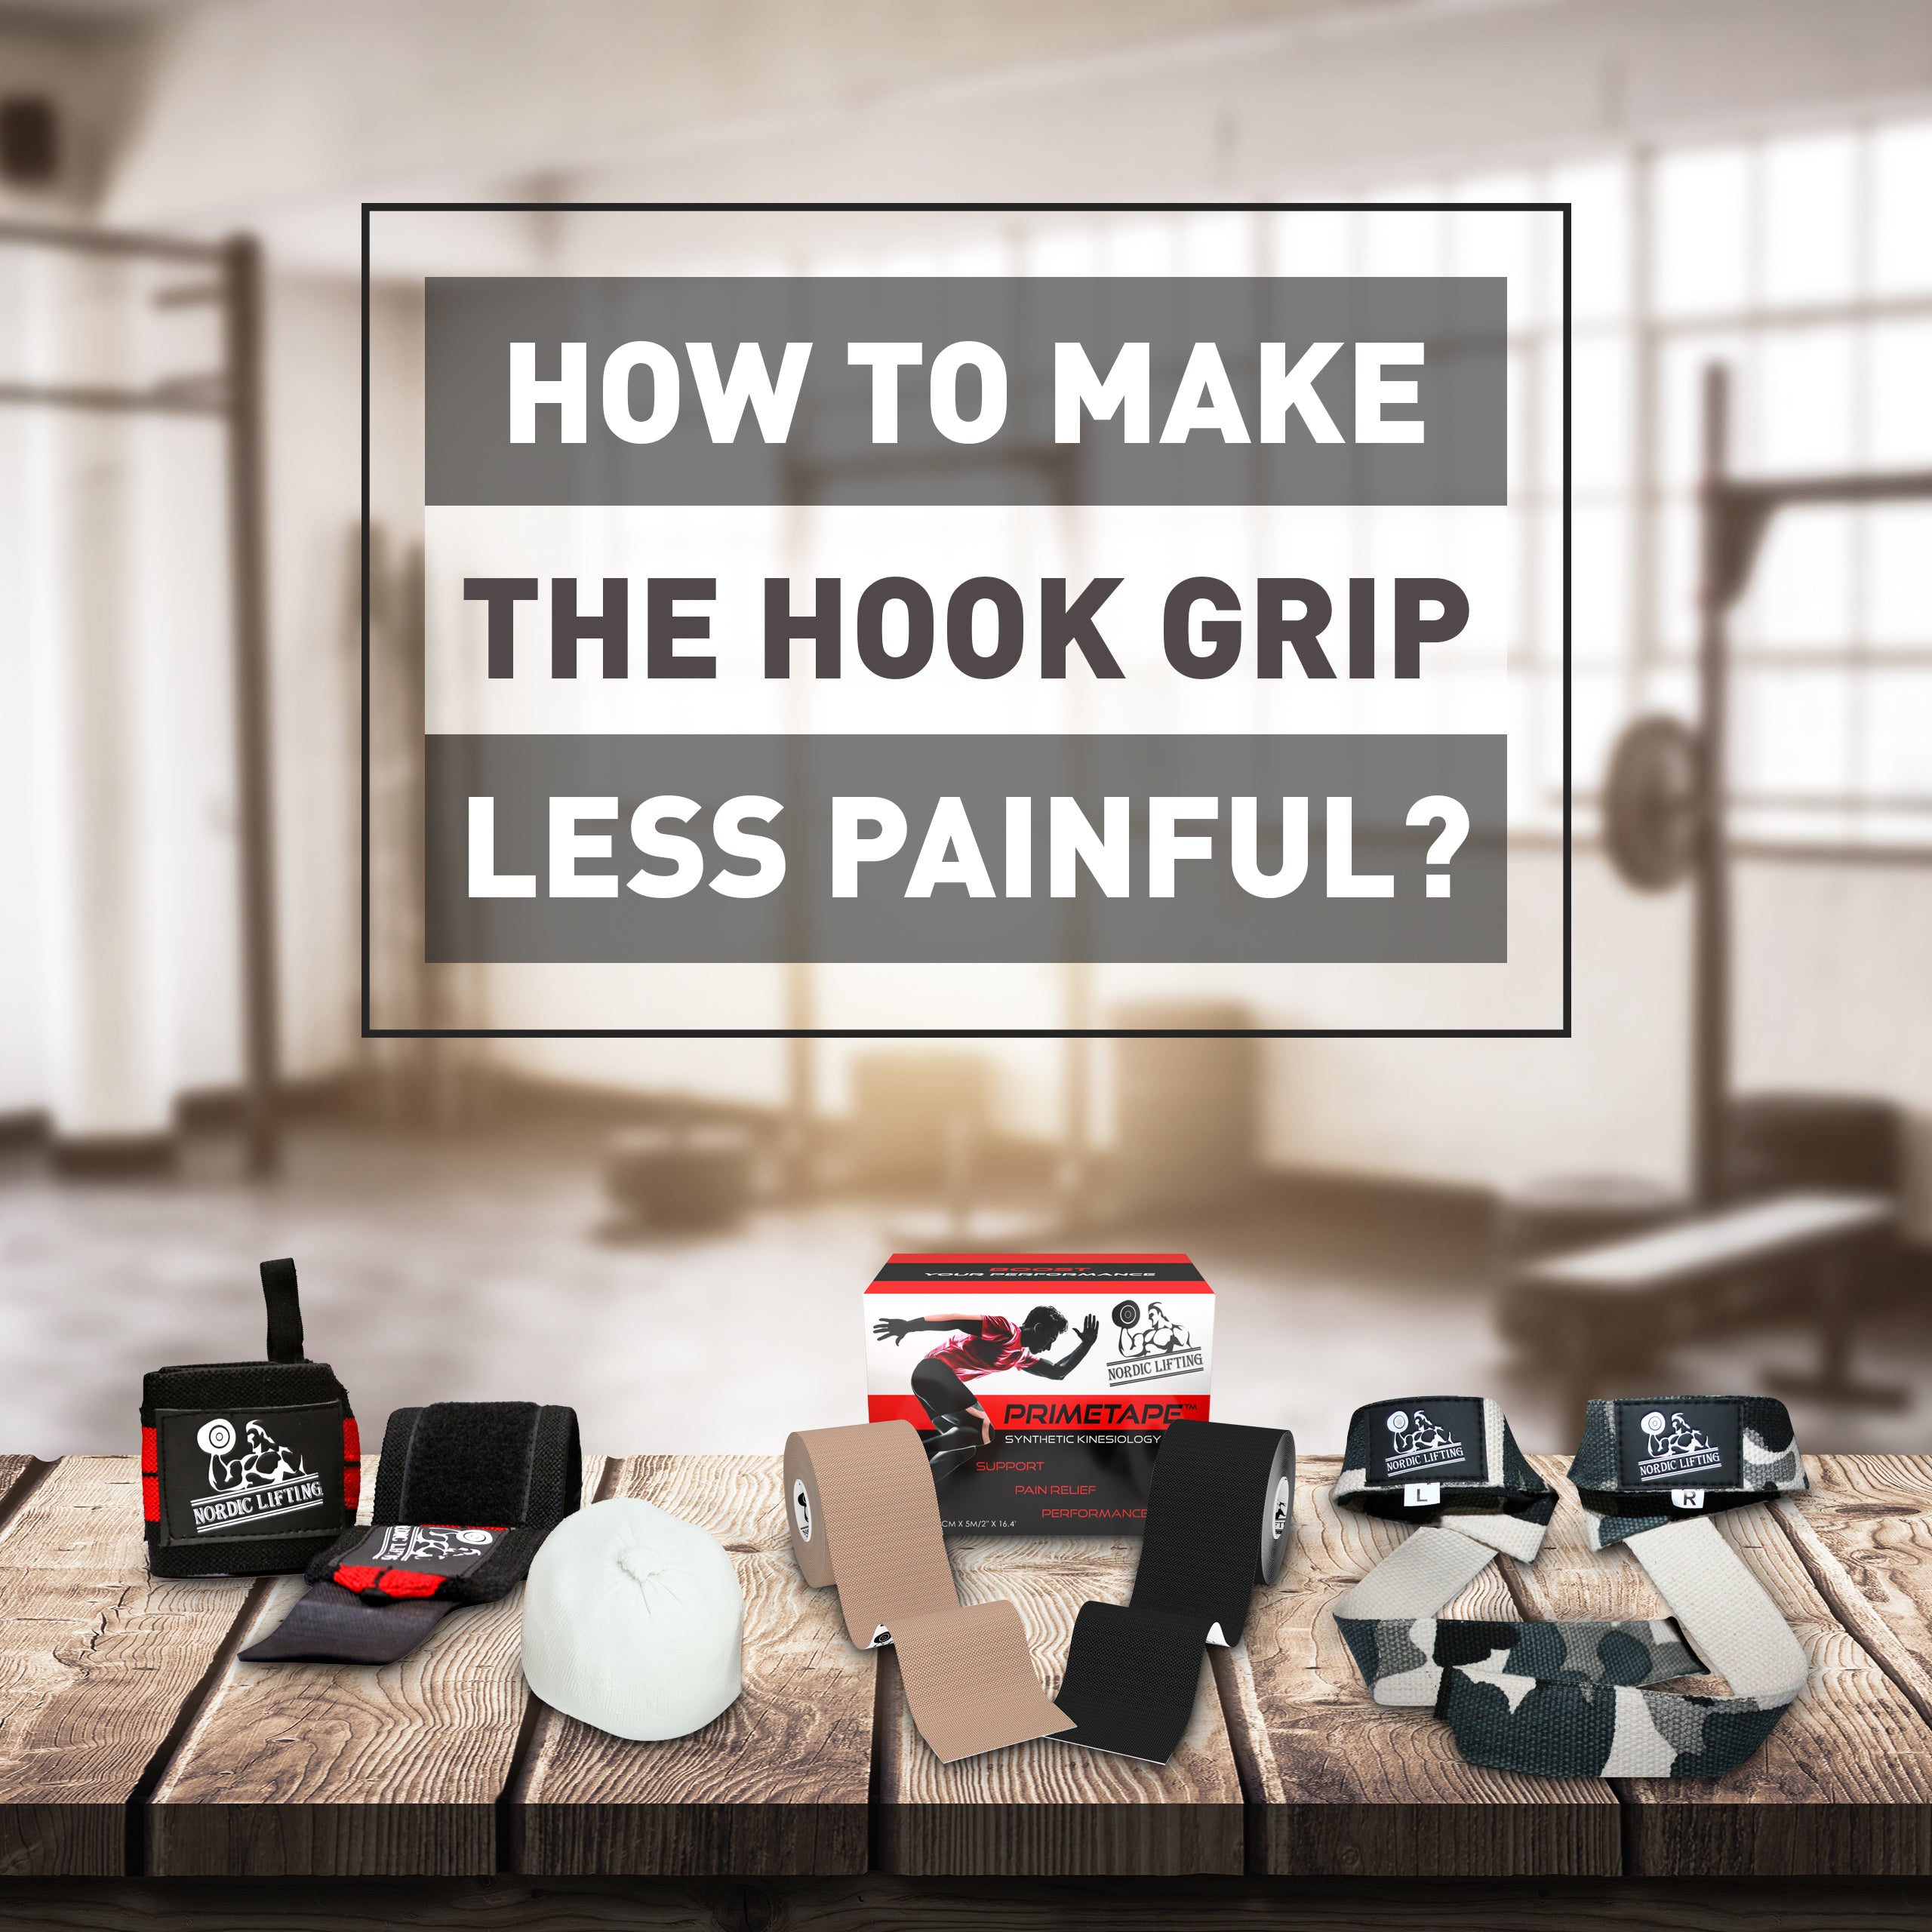 How to use Hook Grip, tape your thumbs and lift more!